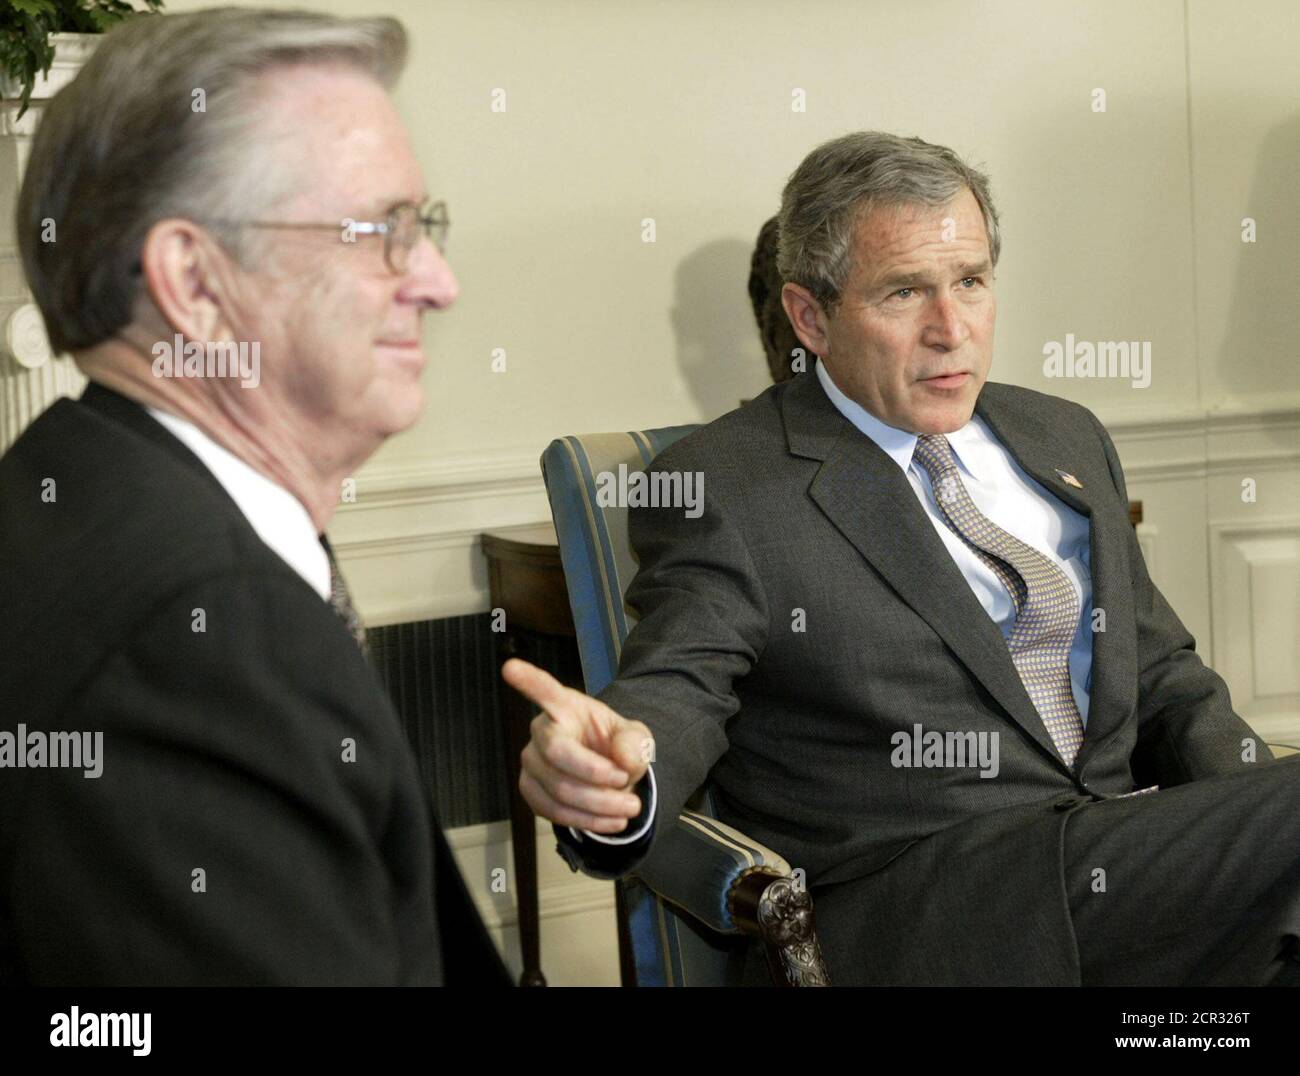 File photo of U.S. President George W. Bush pointing toward U.S. Appeals Court nominee Charles Pickering during a meeting at the White House, March 6, 2002. Frustrated at Democratic blocking maneuvers, President Bush bypassed the Senate on Friday and installed controversial nominee Pickering on the federal appeals court, sources said. The sources, who asked to remain unidentified, said a White House announcement that Pickering had been made a 'recess appointment' to the 5th Circuit Court of Appeals would be issued later. Democrats who have held up Pickering's nomination say he is part of Bush' Stock Photo